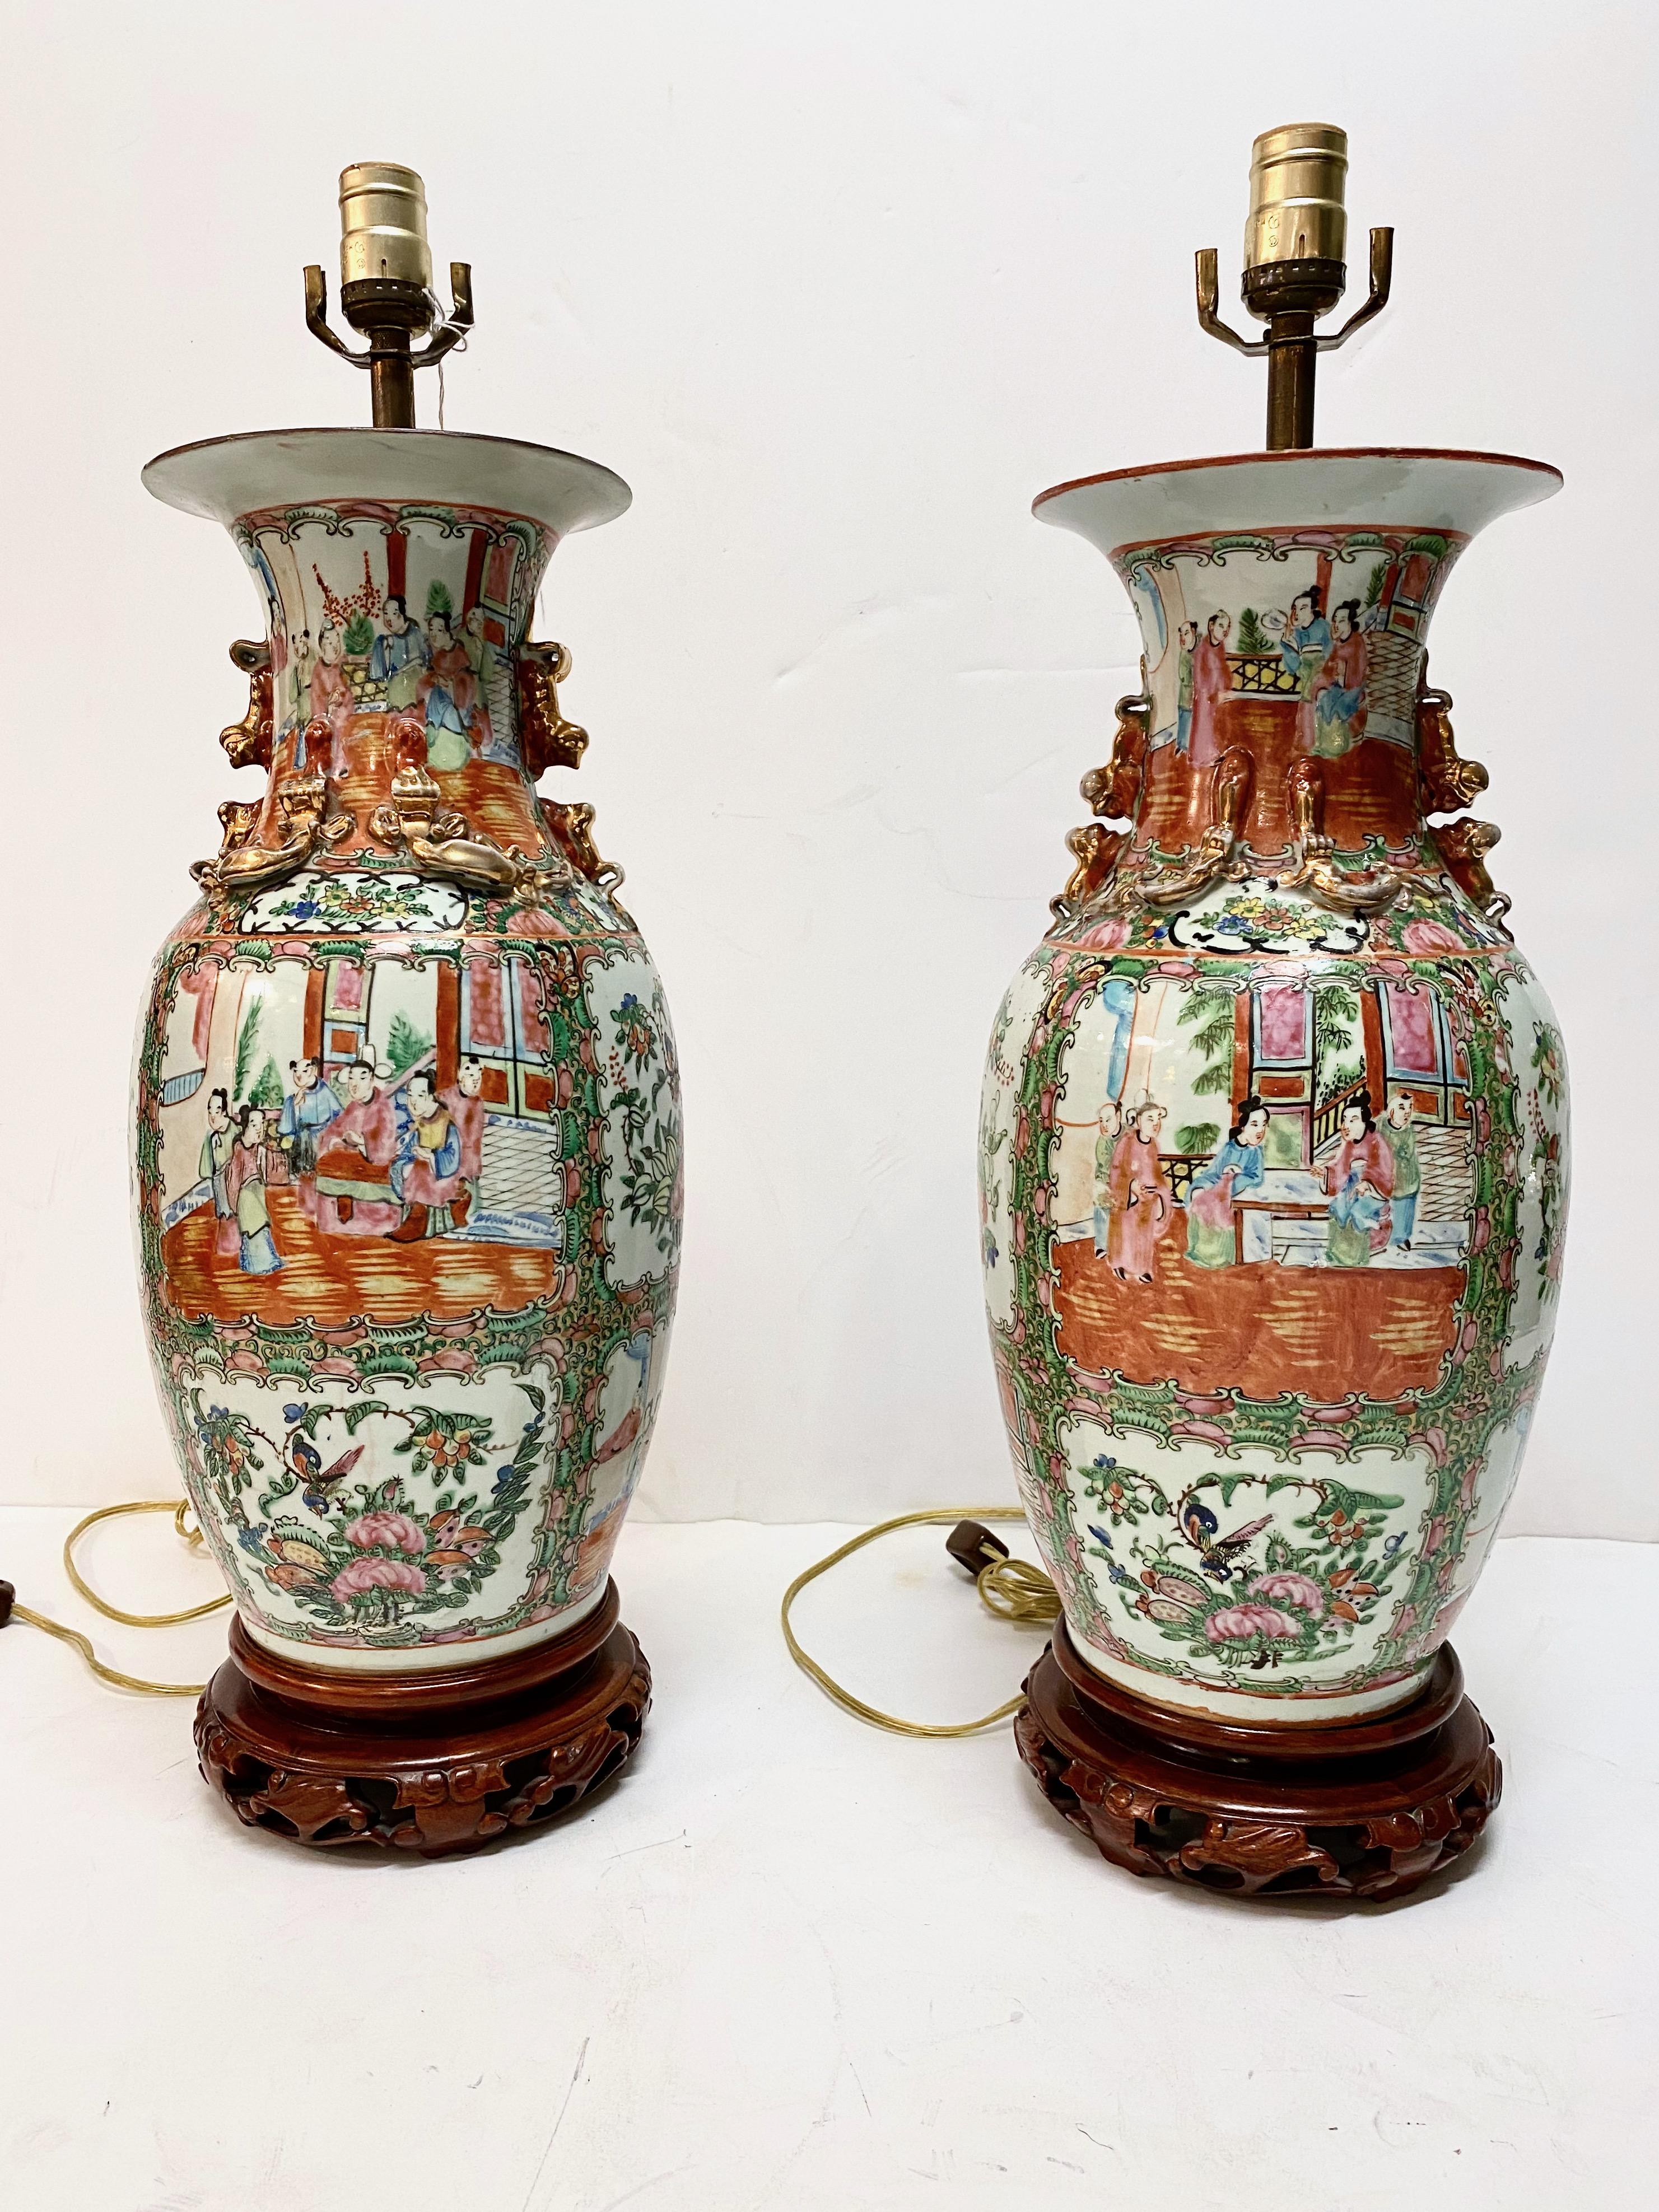 This is a large pair of Rose Canton/Famille Rose vases that have been fitted as lamps. The vases date to the late Ching Period. The large size of the lamps--32